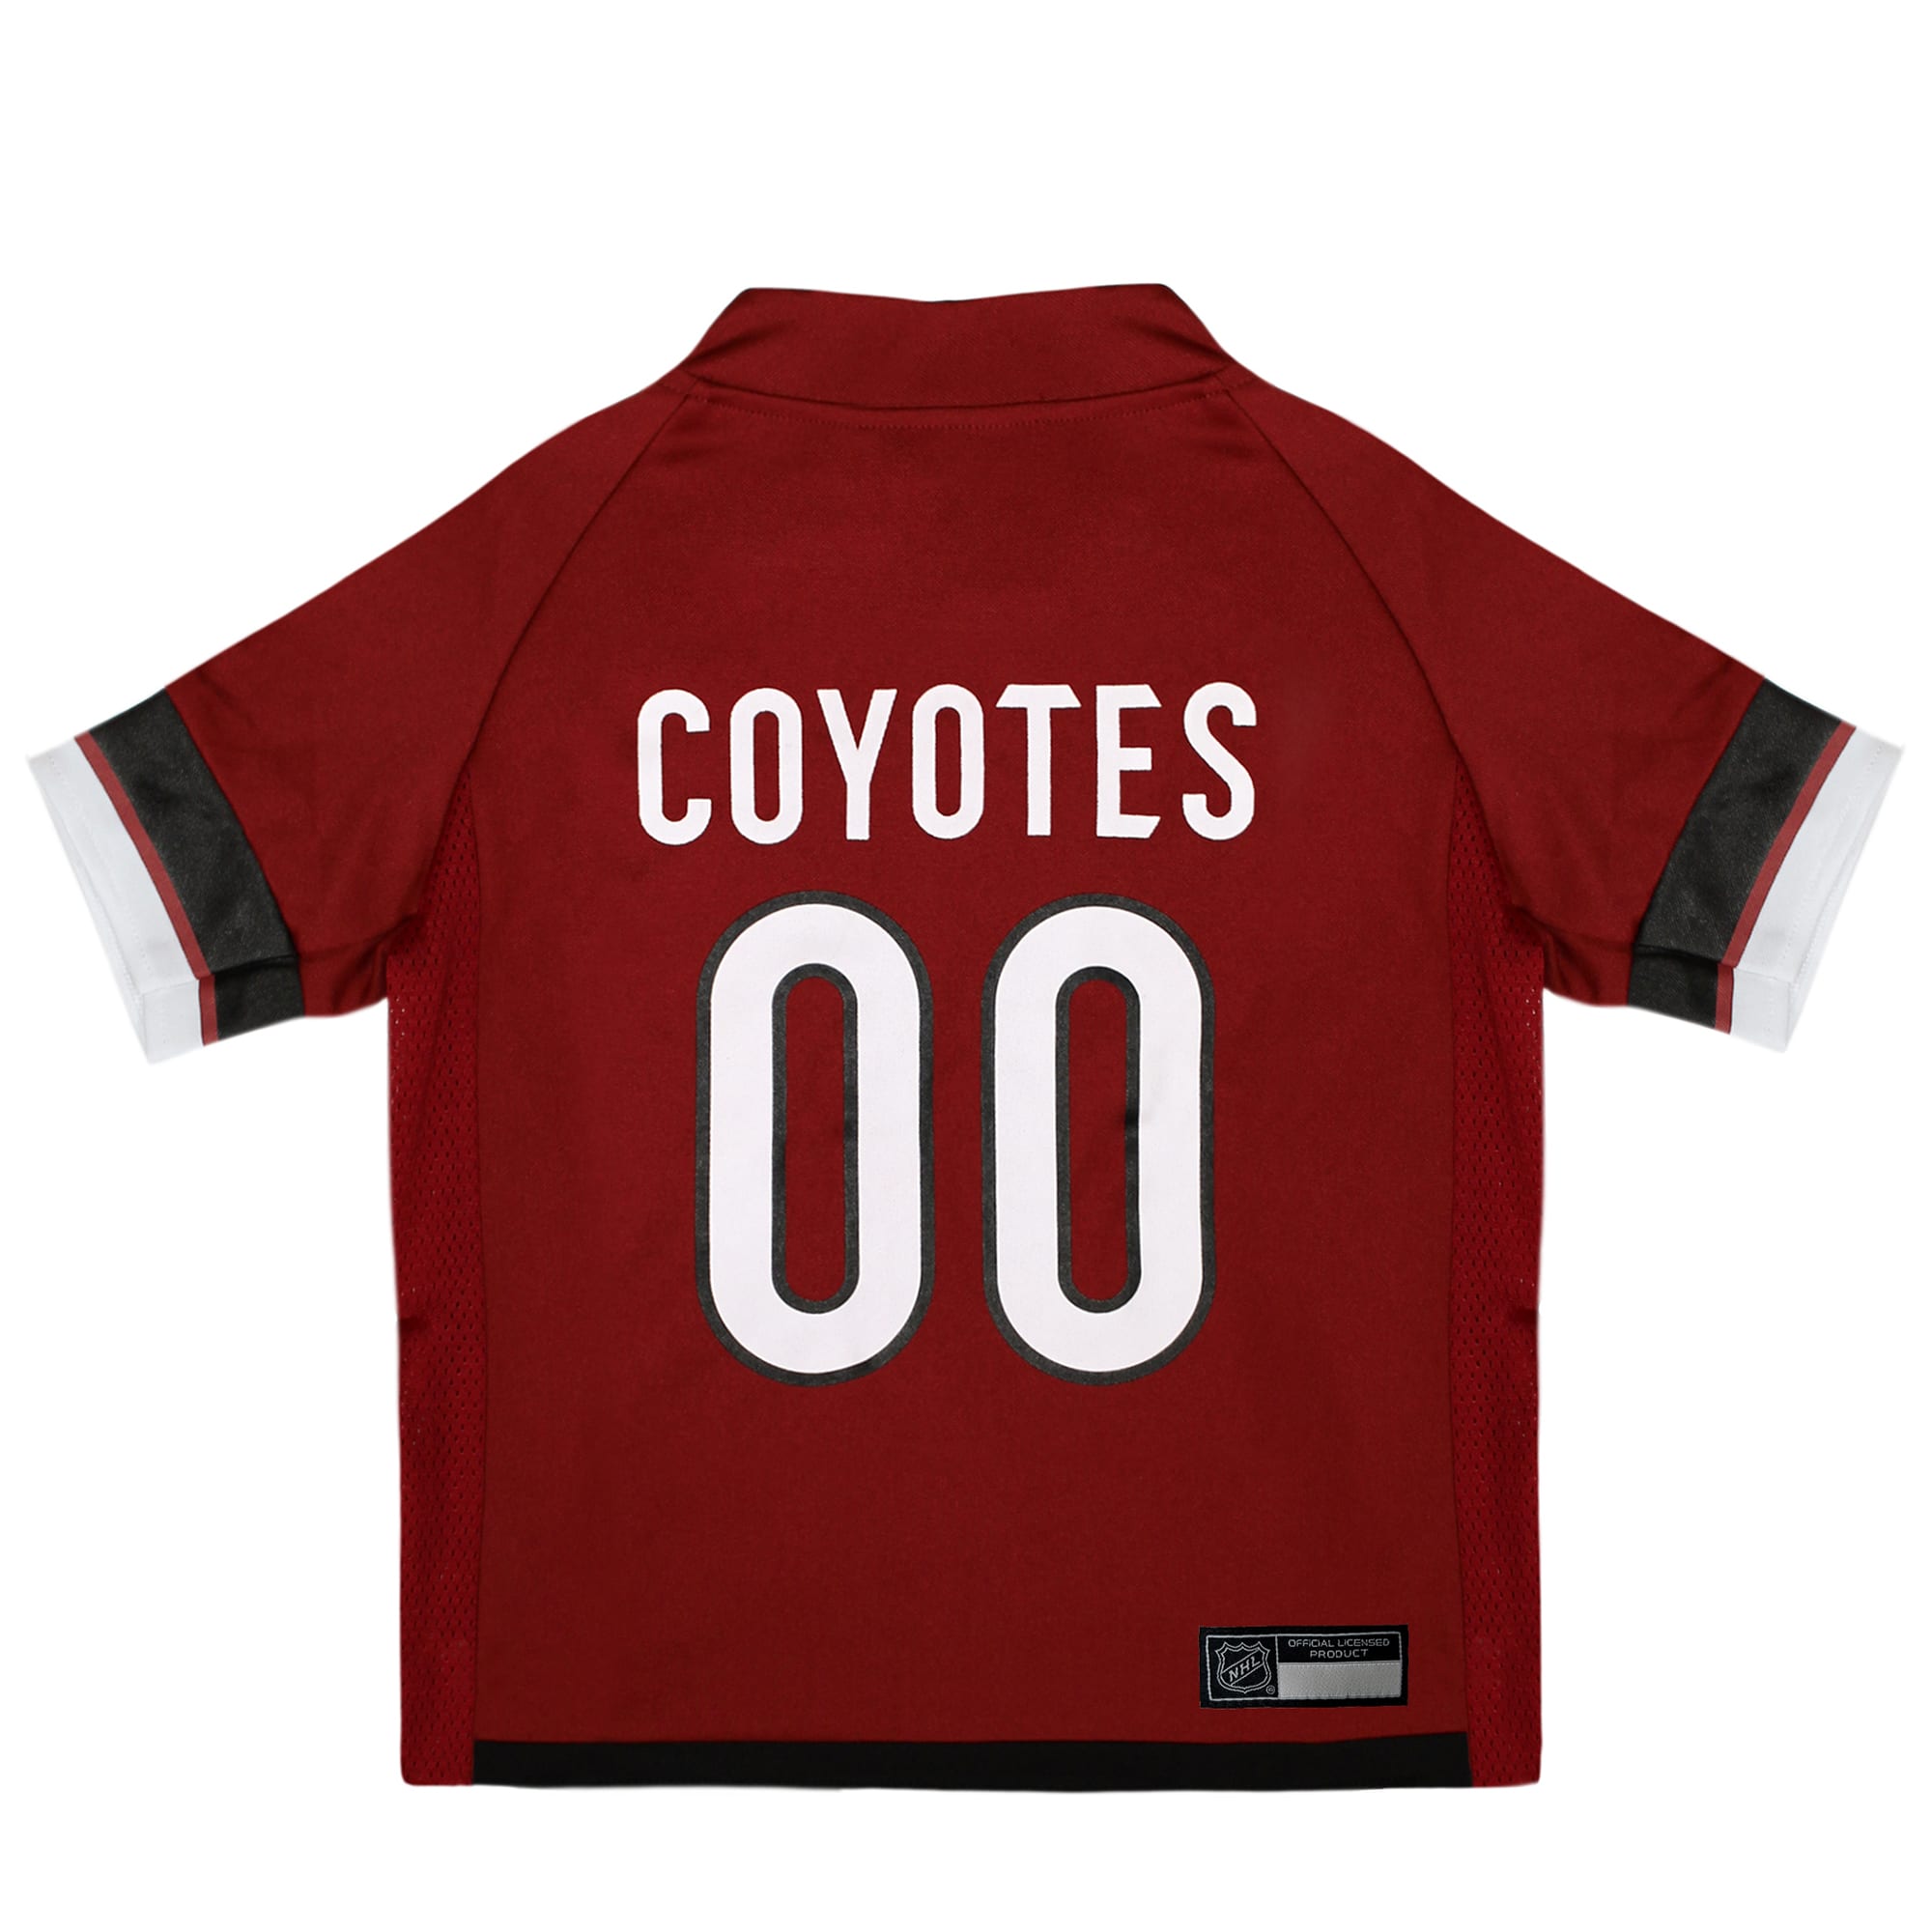 Arizona Coyotes land NHL's first Native American jersey sponsor